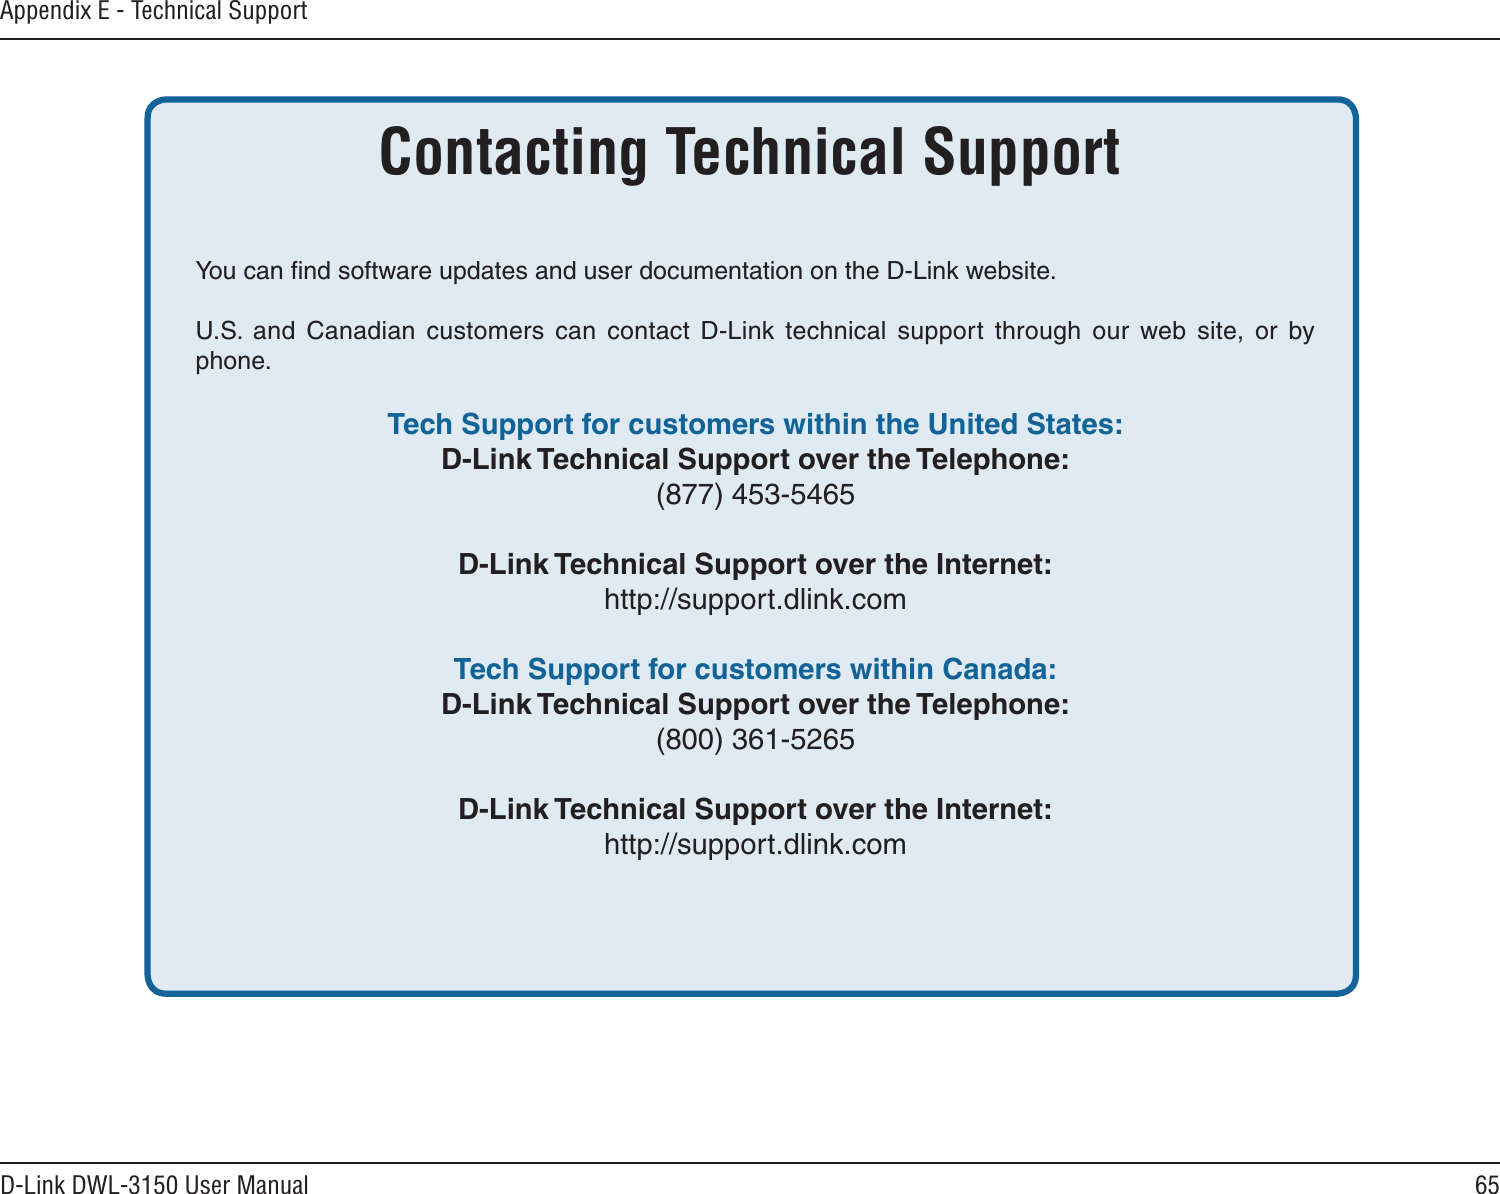 65D-Link DWL-3150 User ManualAppendix E - Technical SupportYou can ﬁnd software updates and user documentation on the D-Link website.U.S.  and  Canadian  customers  can  contact  D-Link  technical  support  through  our  web  site,  or  by phone.  Tech Support for customers within the United States: D-Link Technical Support over the Telephone:  (877) 453-5465  D-Link Technical Support over the Internet:  http://support.dlink.com Tech Support for customers within Canada: D-Link Technical Support over the Telephone:  (800) 361-5265    D-Link Technical Support over the Internet:  http://support.dlink.comContacting Technical Support